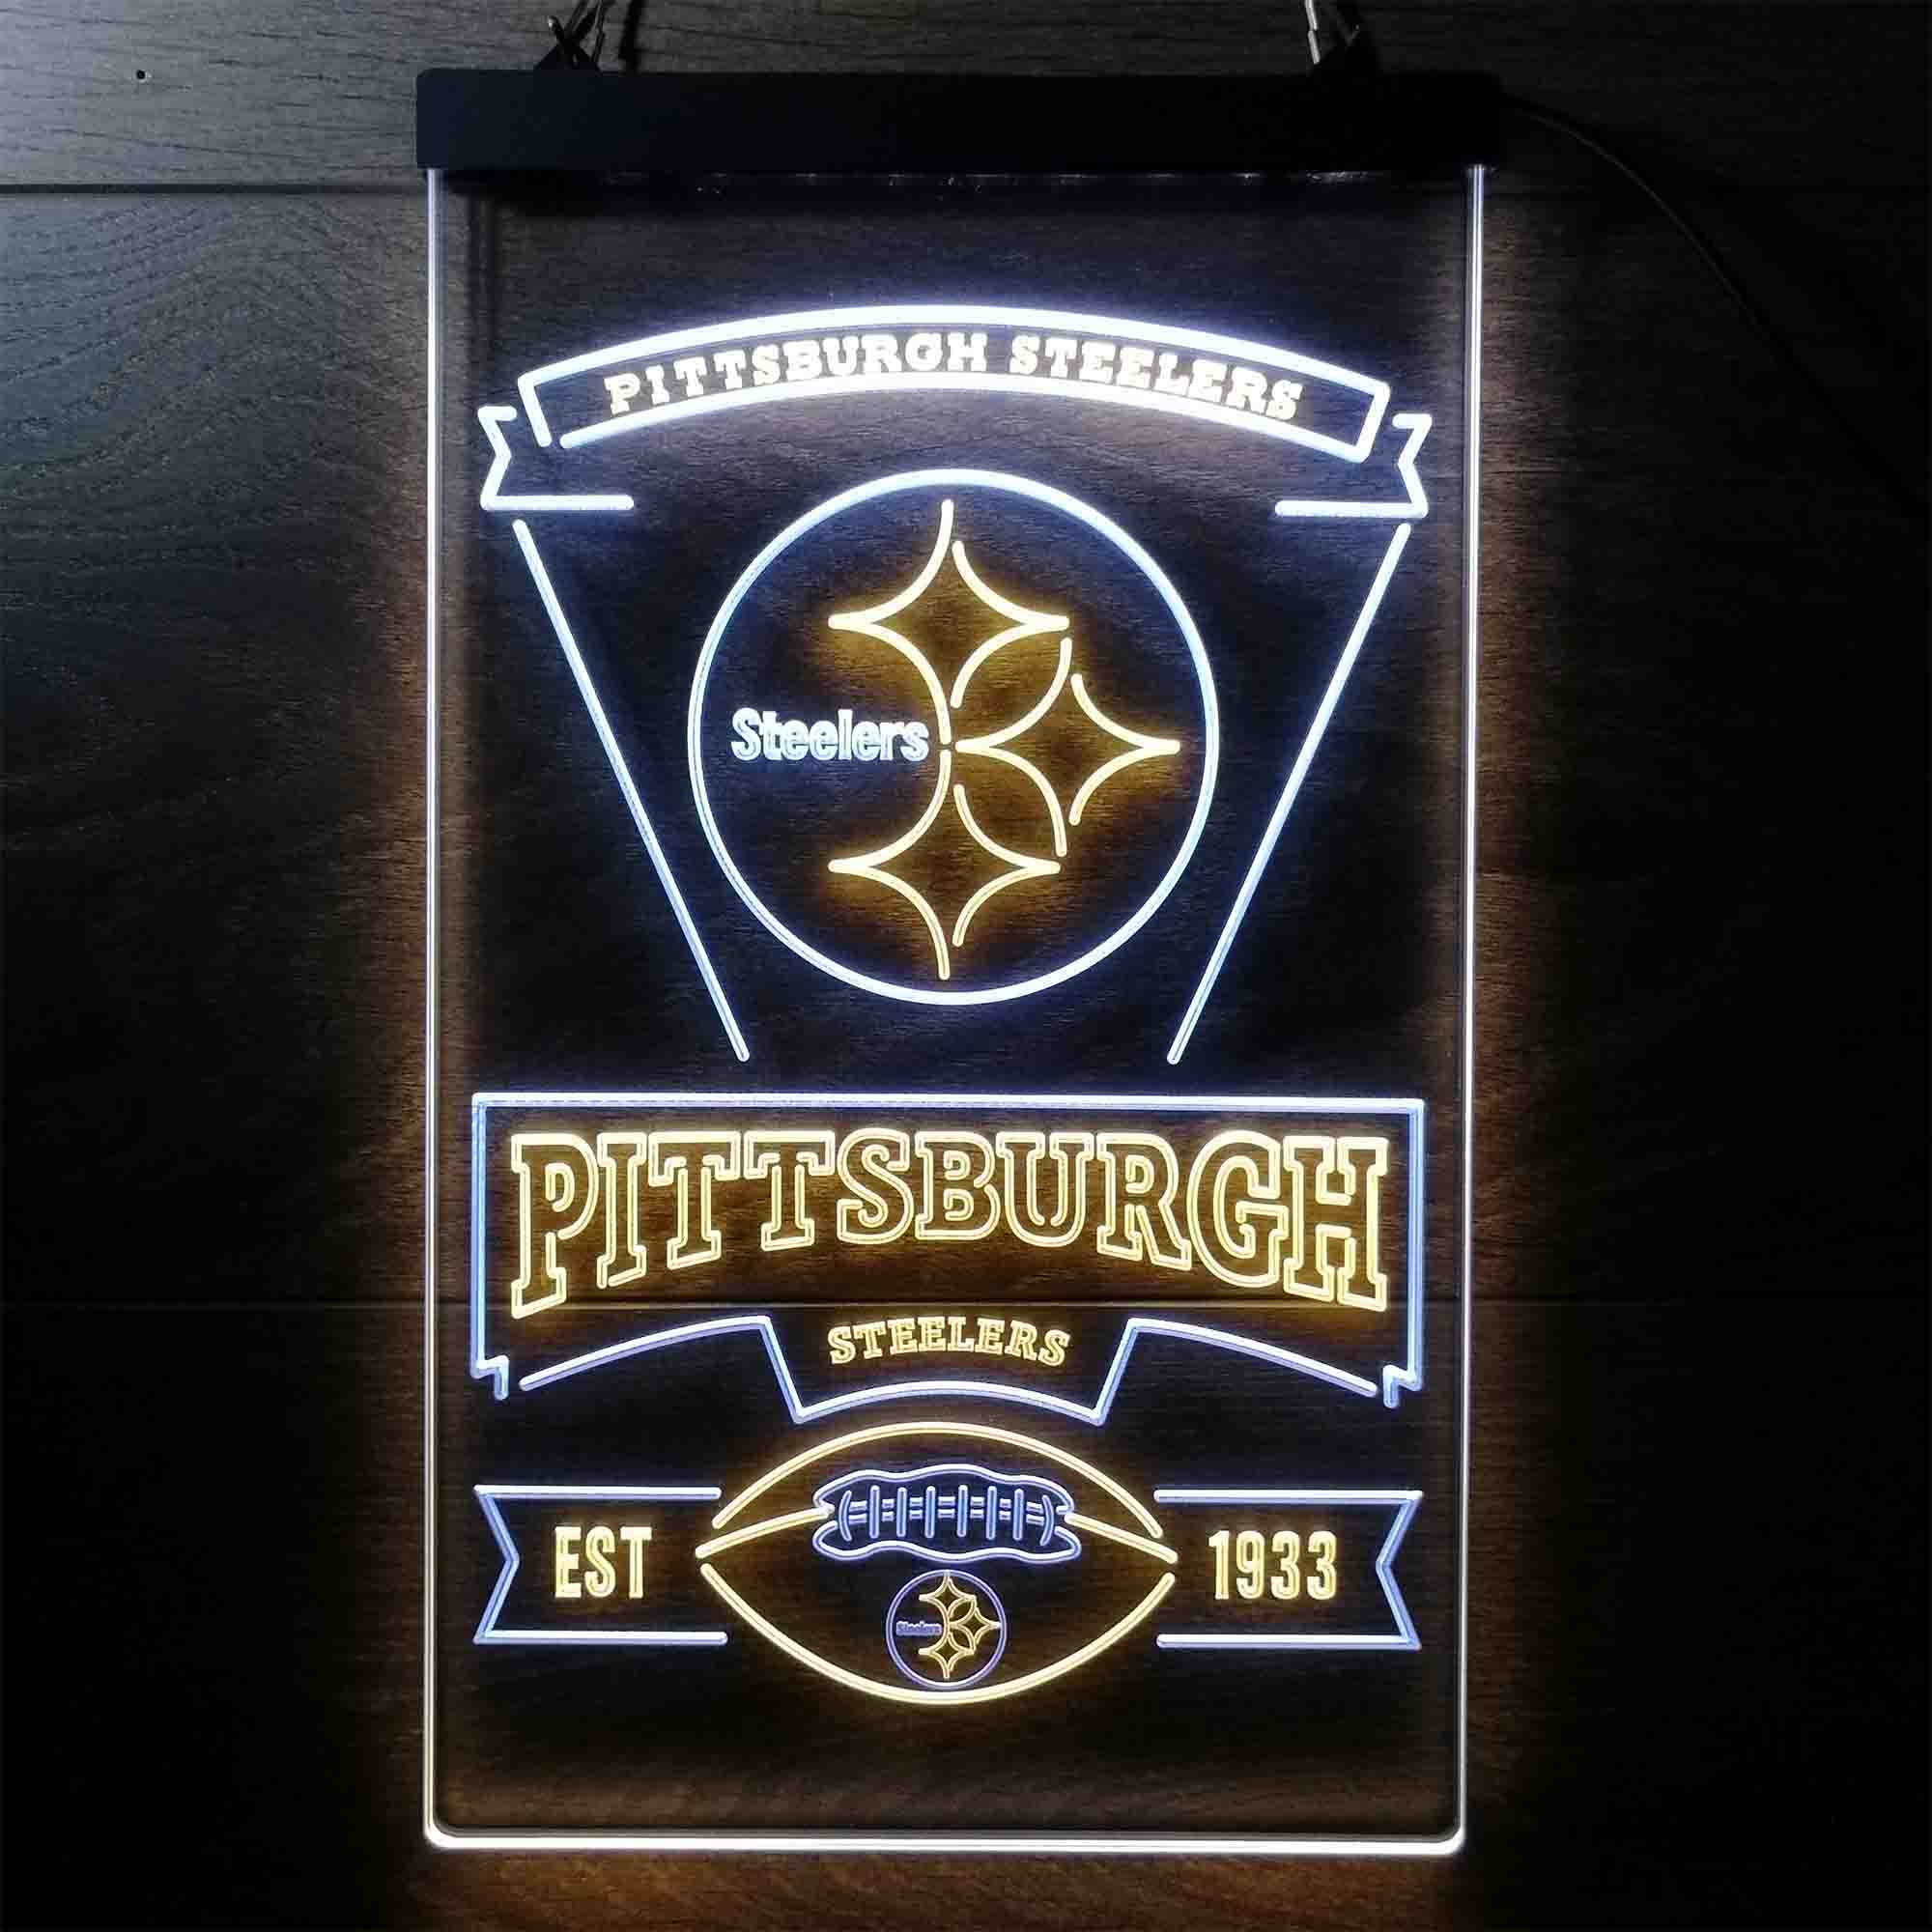 Pittsburgh Steelers EST 1933 Neon LED Sign